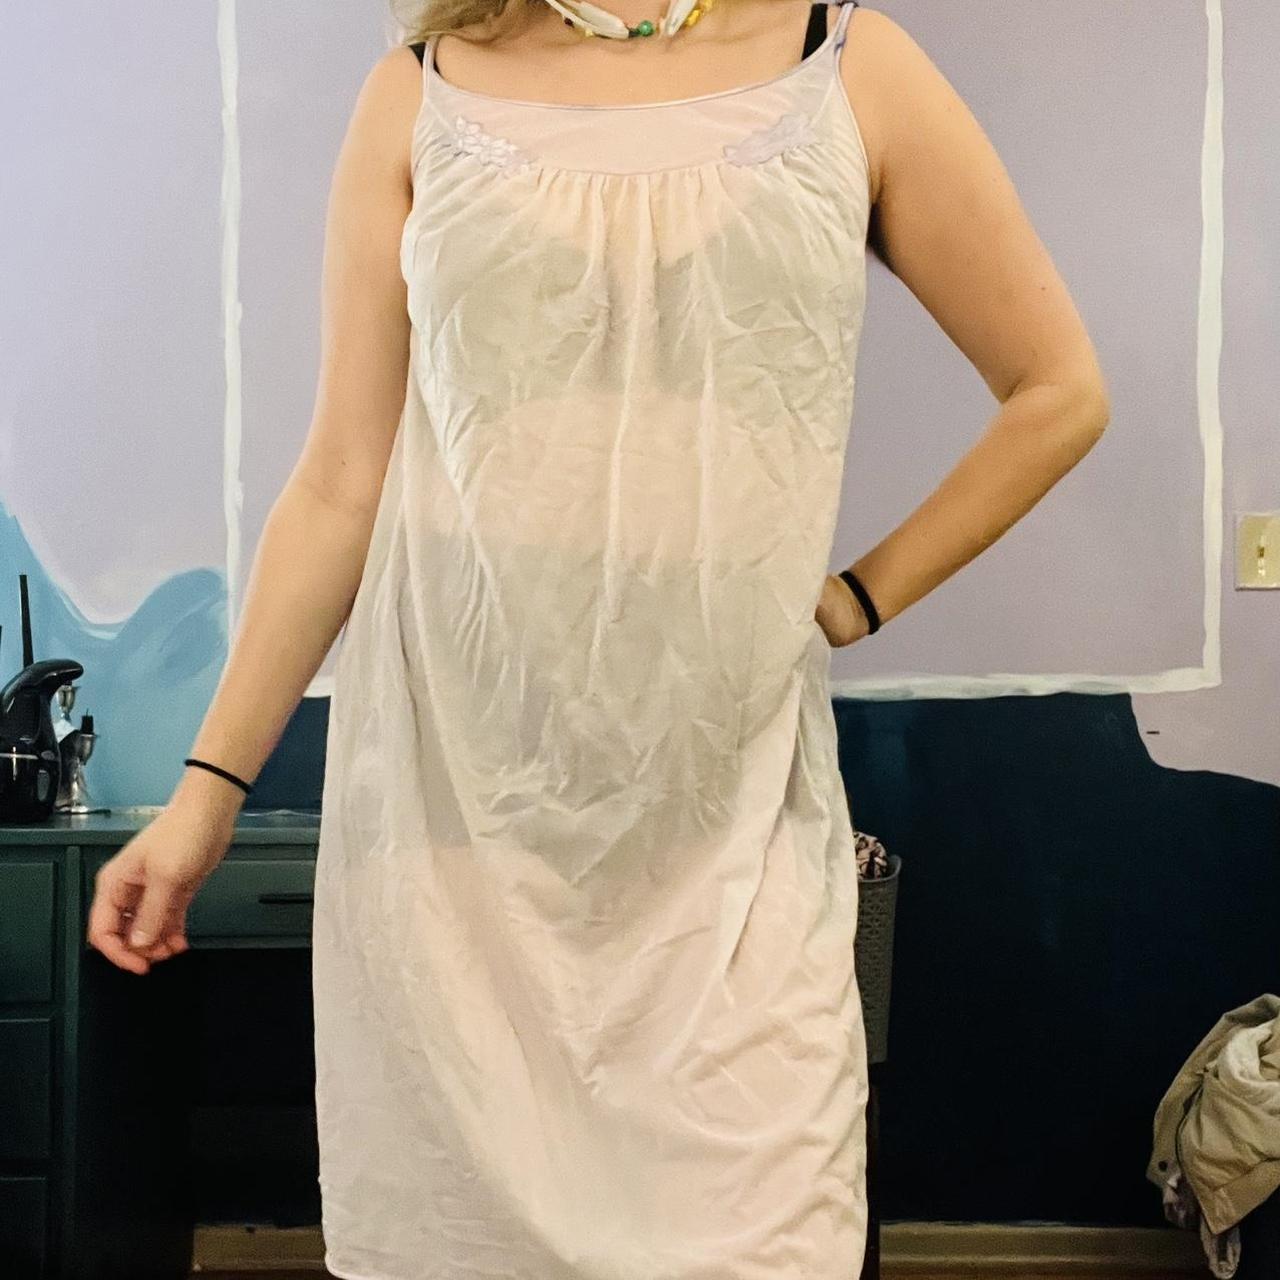 Women's Vintage Style Silk Nightgown - Lilac